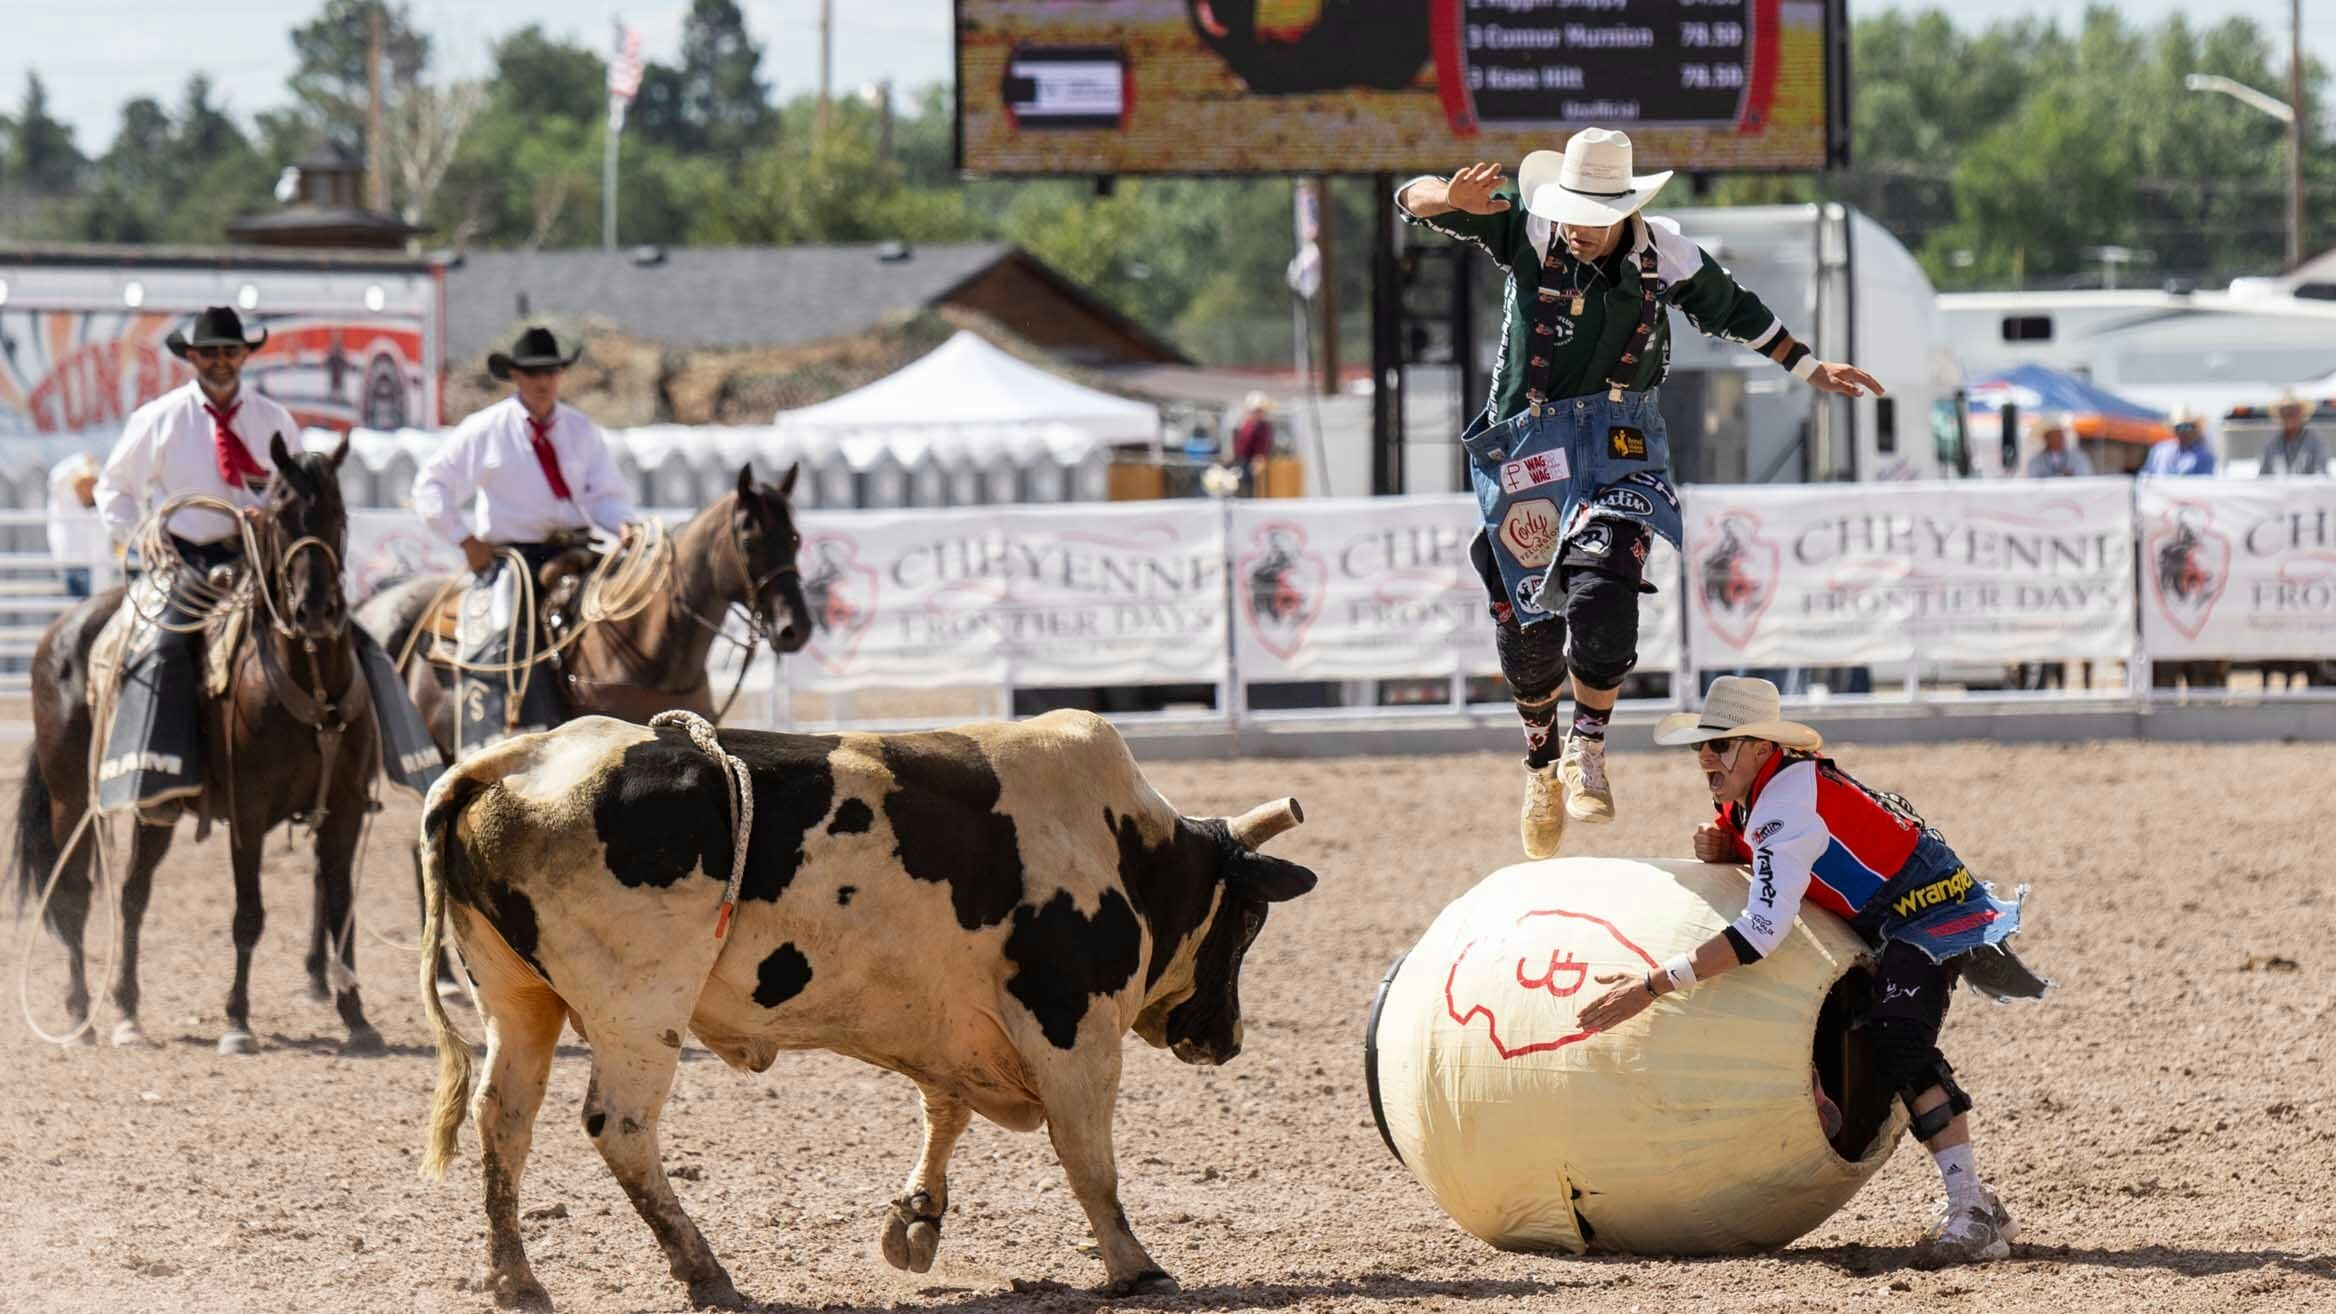 Bull Fighters Dusty Tuckness and Cody Webster fight a bull while Barrelman Cody Sosebee hides in the barrel at Cheyenne Frontier Days on July 25, 2023.